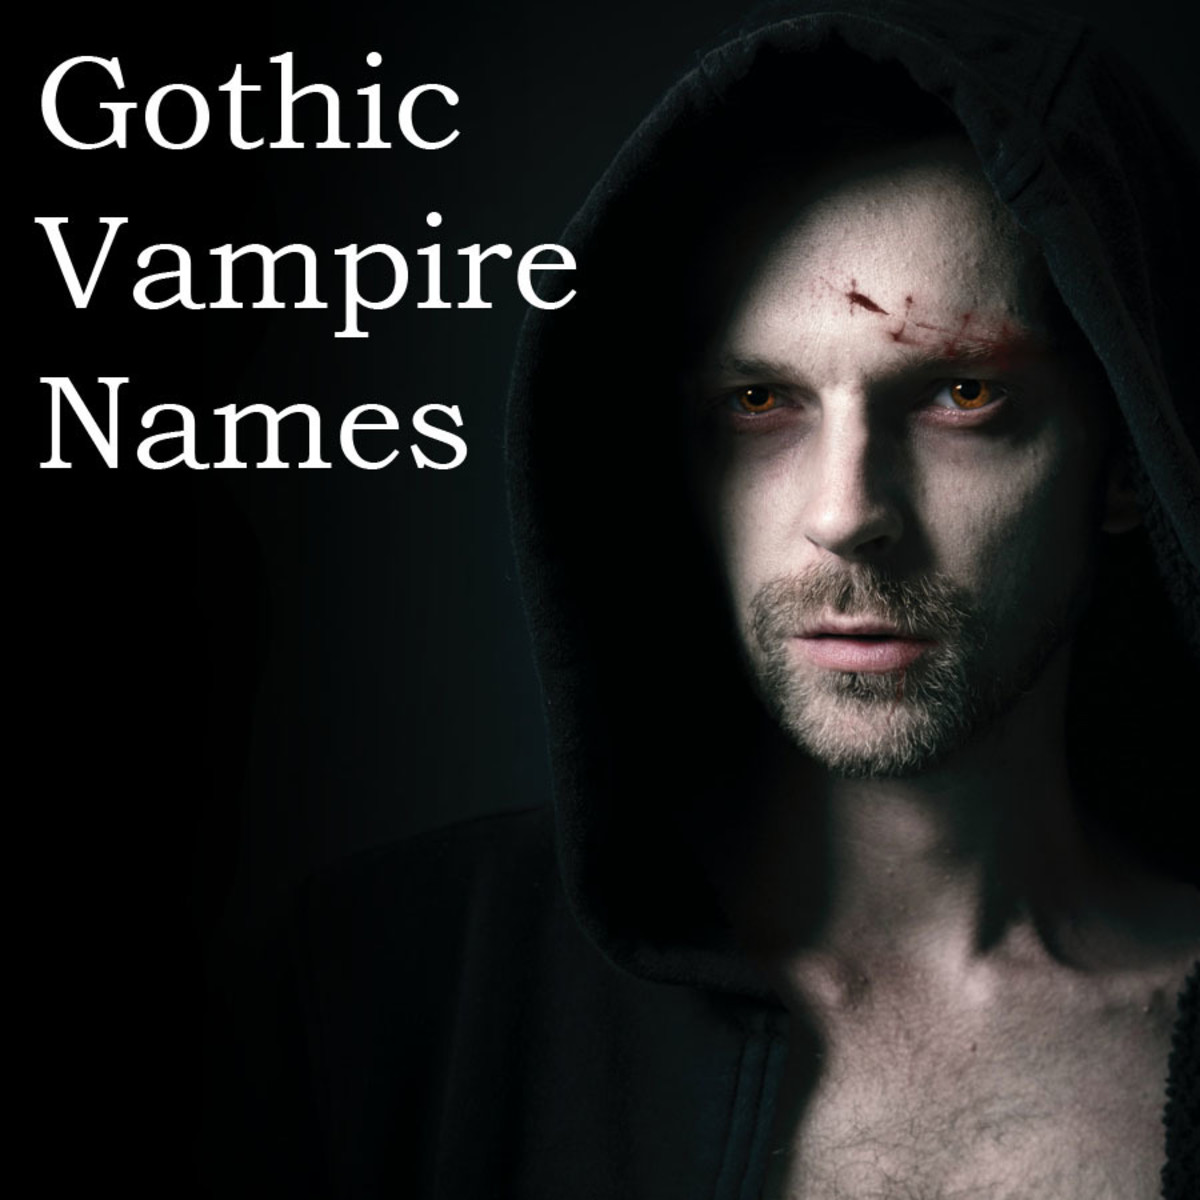 Cool Gothic Vampire Names for Men and Women